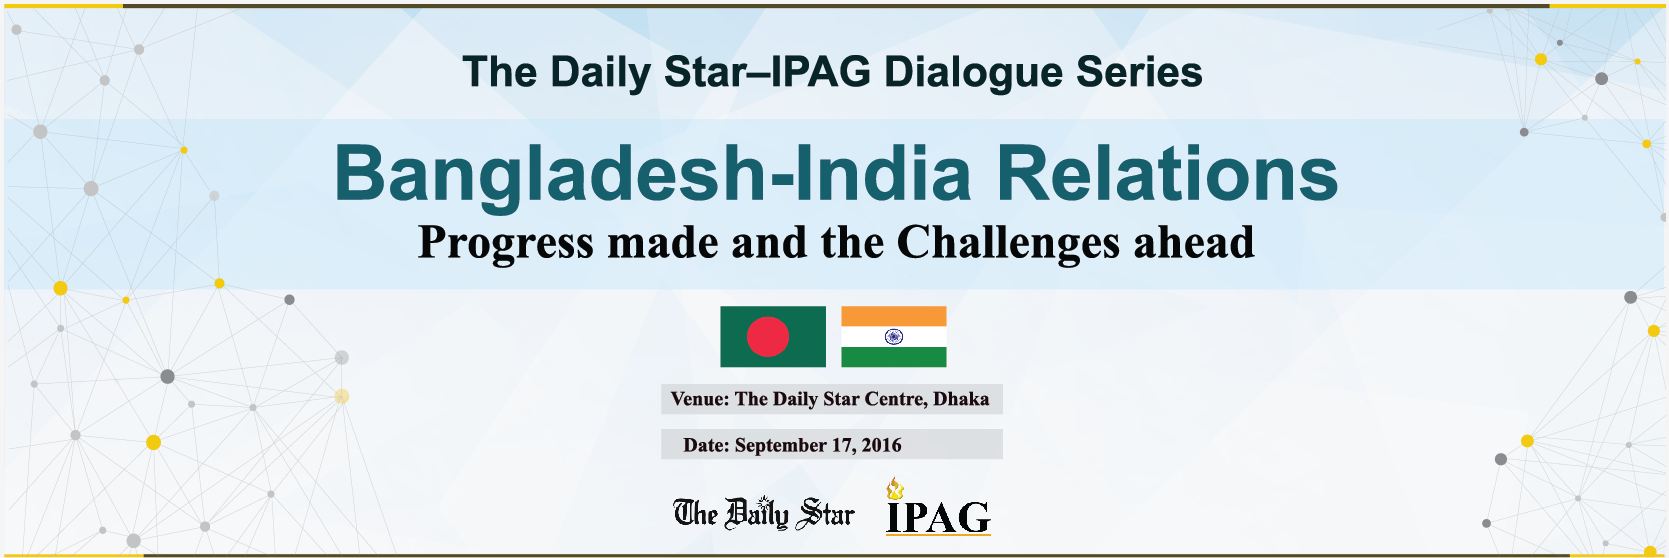 The Daily Star–IPAG Dialogue Series: “Bangladesh India Relations: Progress made and the Challenges ahead”